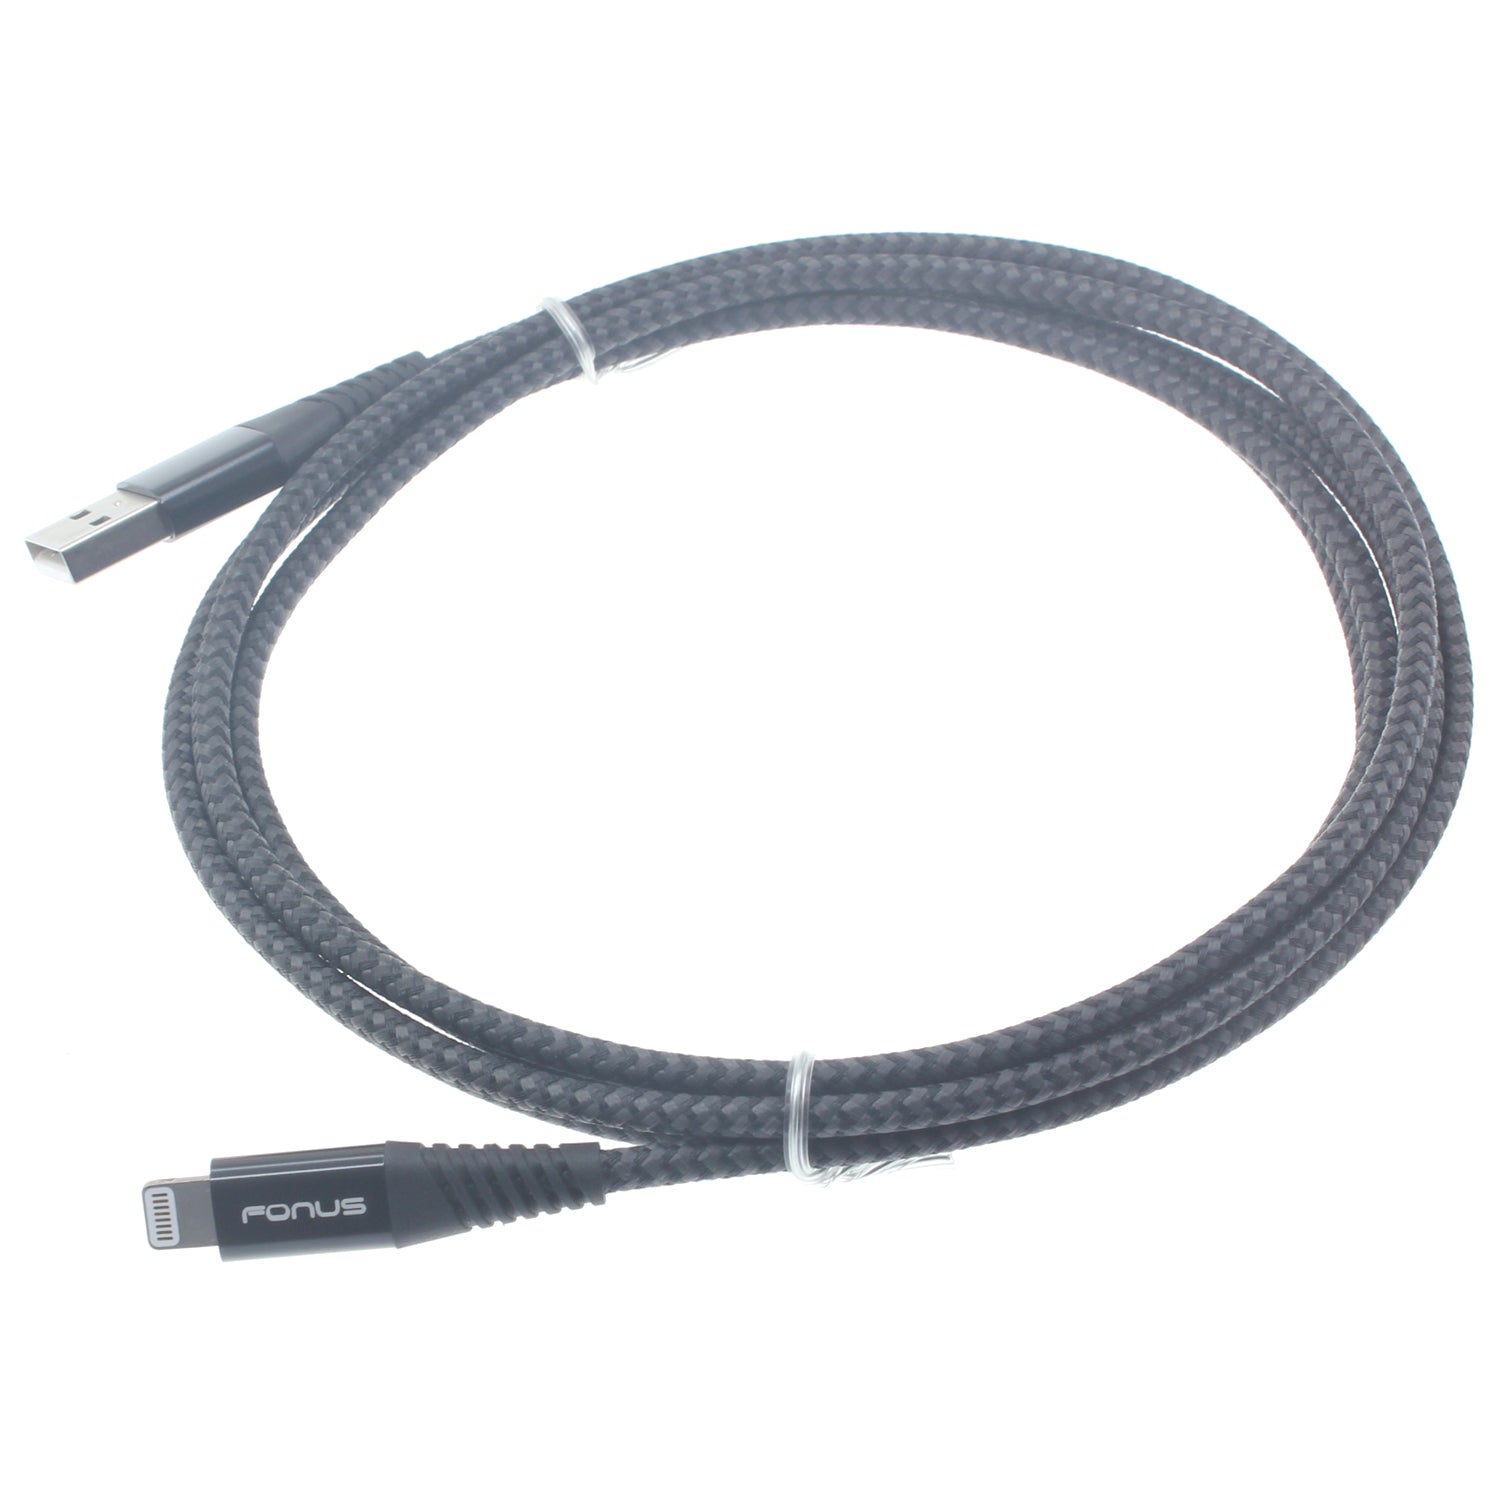 10ft USB Cable, Long Braided Wire Power Charger Cord - NWL65